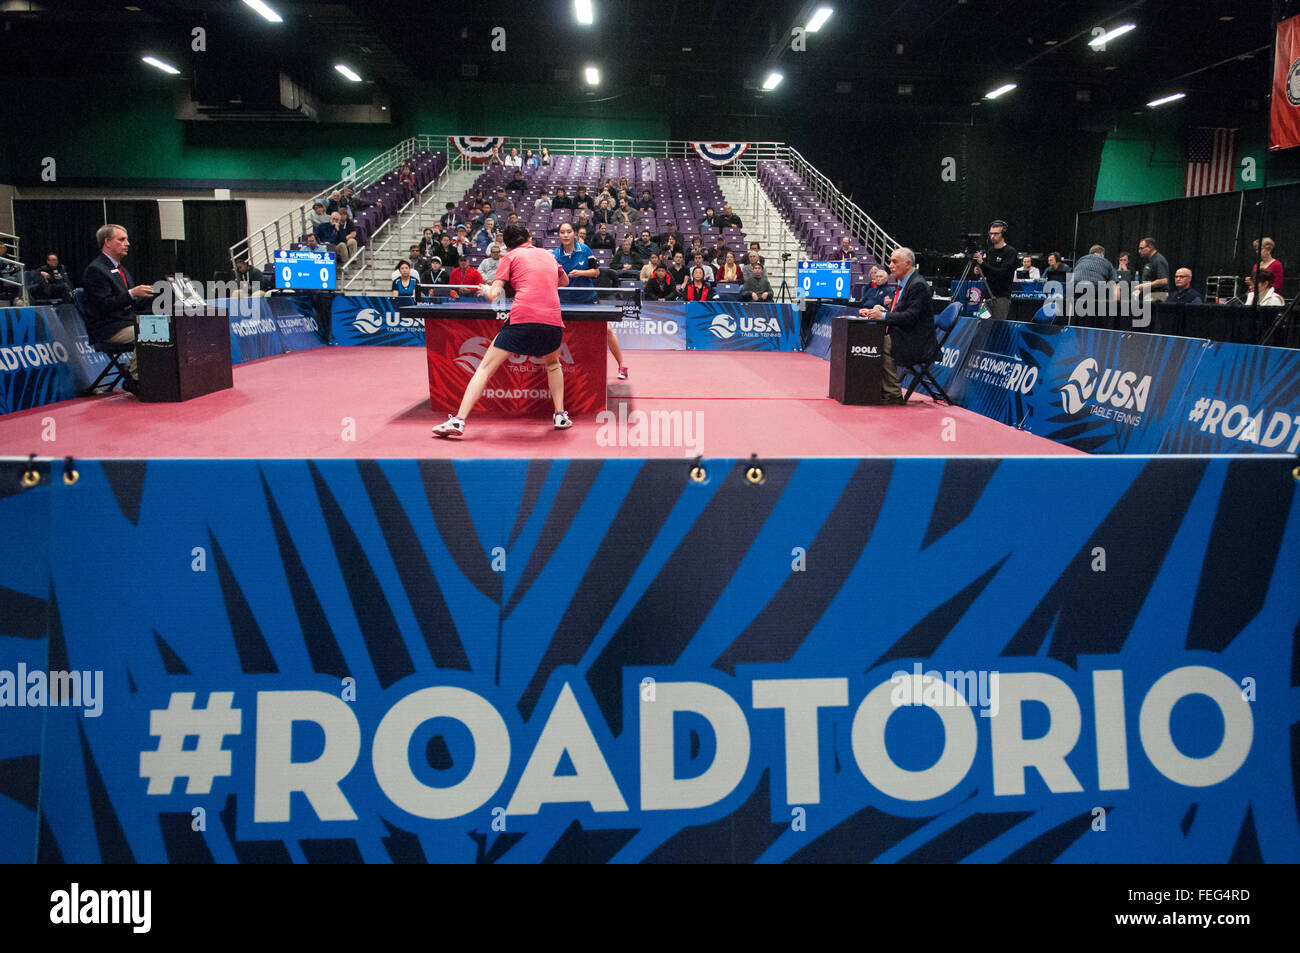 Greensboro, North Carolina, USA. 6th Feb, 2016. CRYSTAL WANG, in blue, and ANGELA GUAN in action during the women's finals on day three of the 2016 U.S. Olympic Table Tennis Trials. Wang defeated Guan to earn the final spot on the U.S. Olympic team. The top three men and women from the trials move on to compete in April at the 2016 North America Olympic Qualification tournament in Ontario, Canada. The 2016 Summer Olympics will be held in Rio De Janeiro, Brazil, Aug. 5-21. © Timothy L. Hale/ZUMA Wire/Alamy Live News Stock Photo